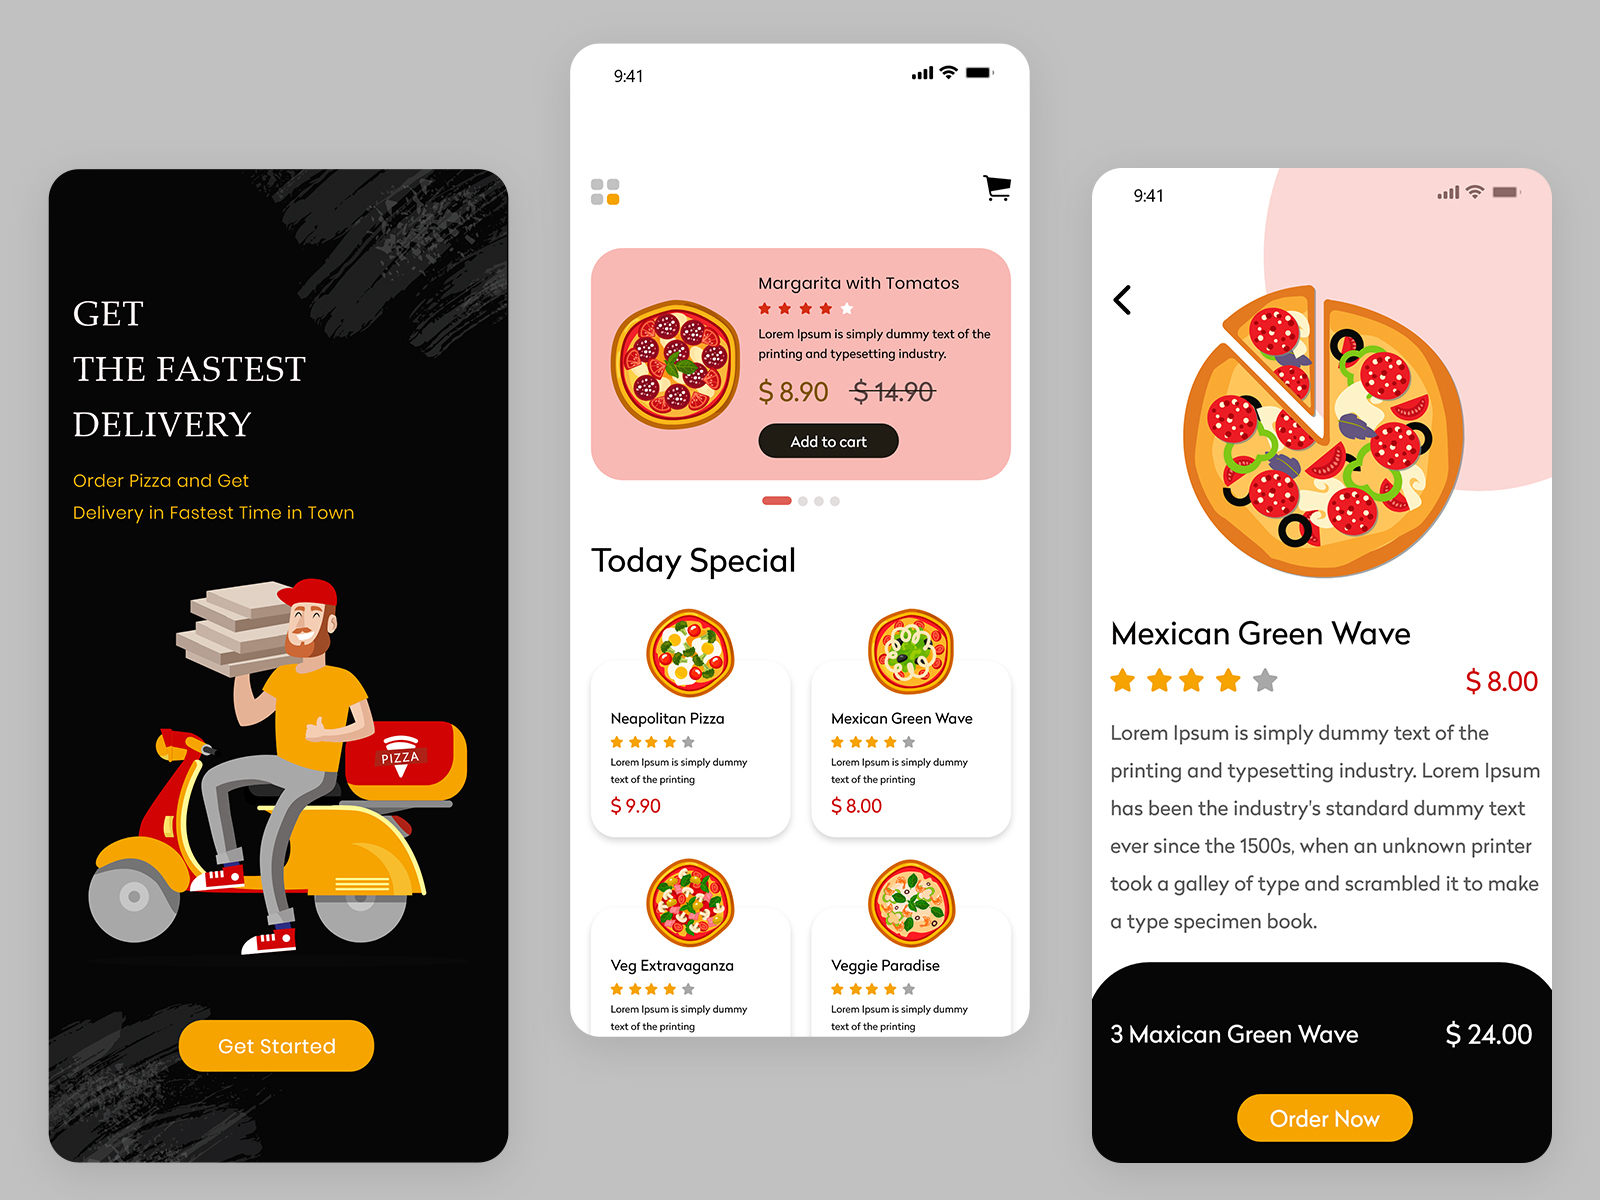 Взломка pizza ready. Pizza delivery app. Pizza delivery app Screen. Pitza - Full Stack React nextjs Single Restaurant pizza order and delivery app. Pizza Express logo.